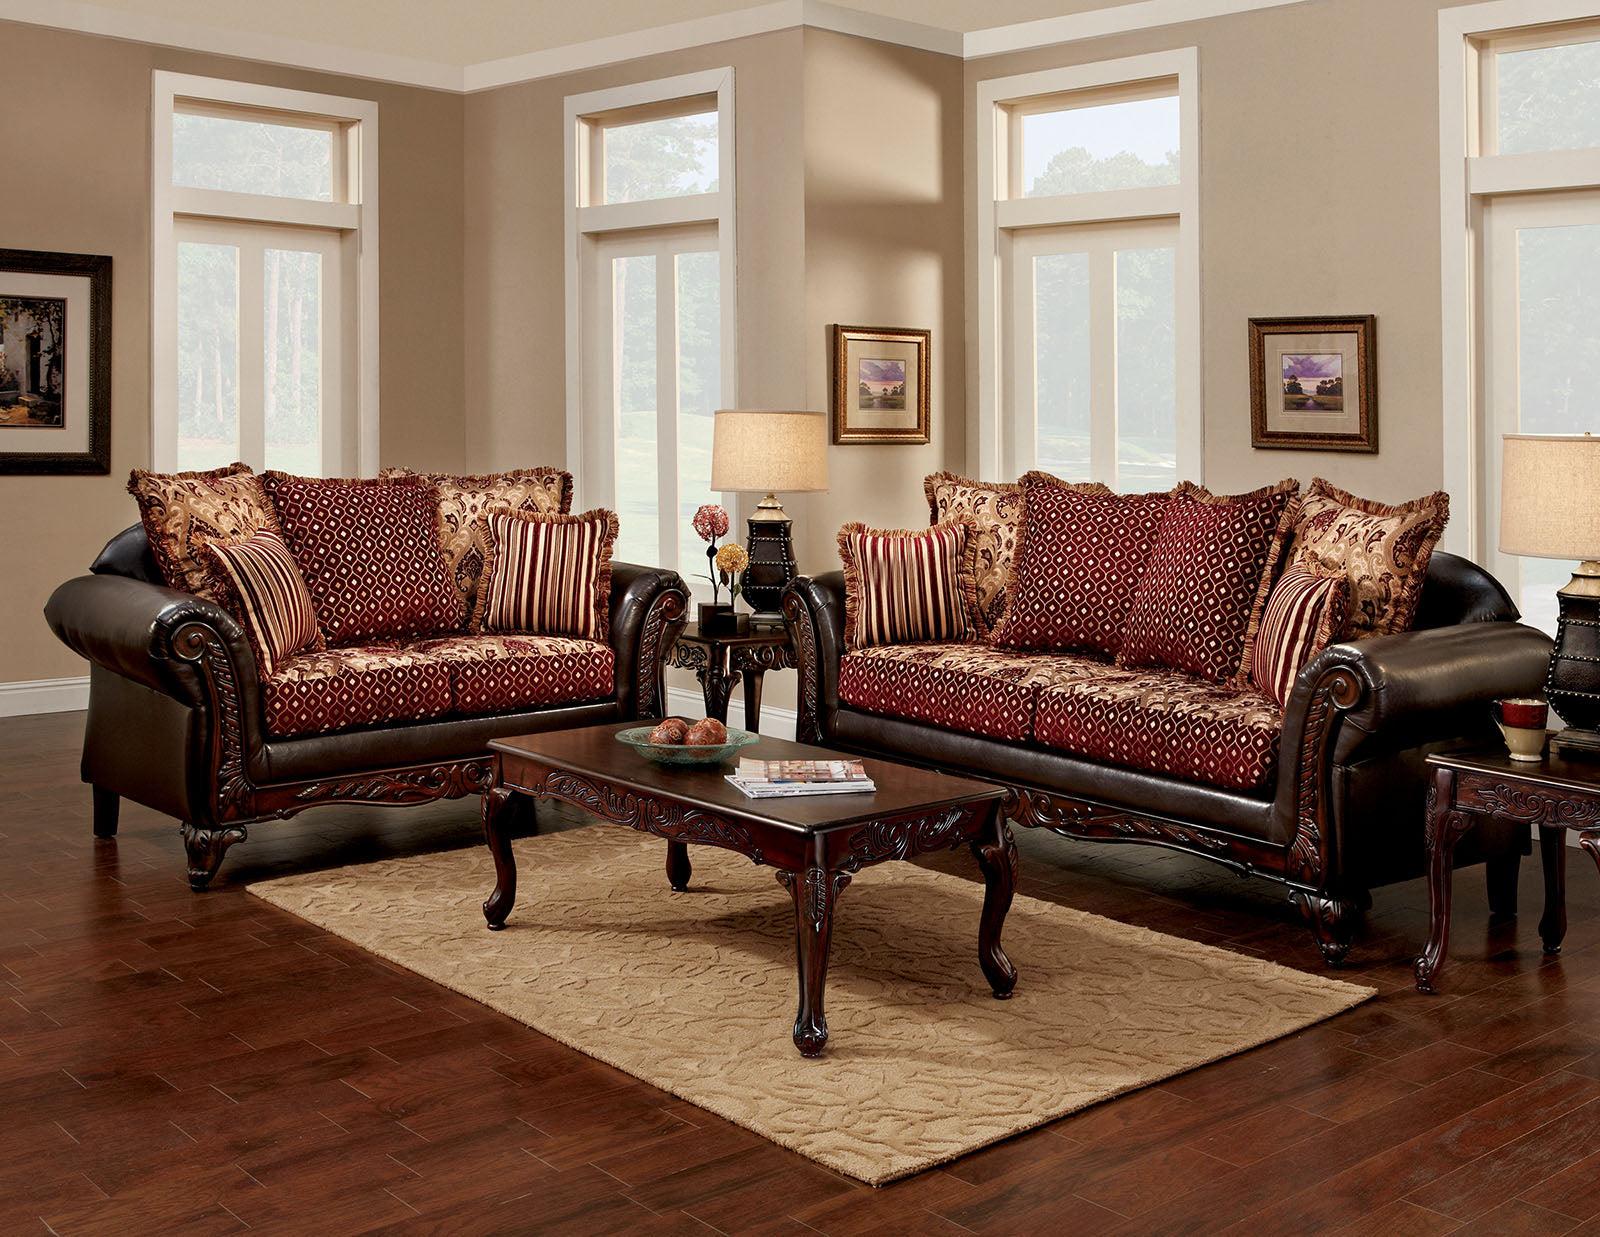 Traditional Sofa Loveseat and Coffee Table Set SM7507N-5PC Ellis & Cheshire SM7507N-5PC in Burgundy, Brown Chenille